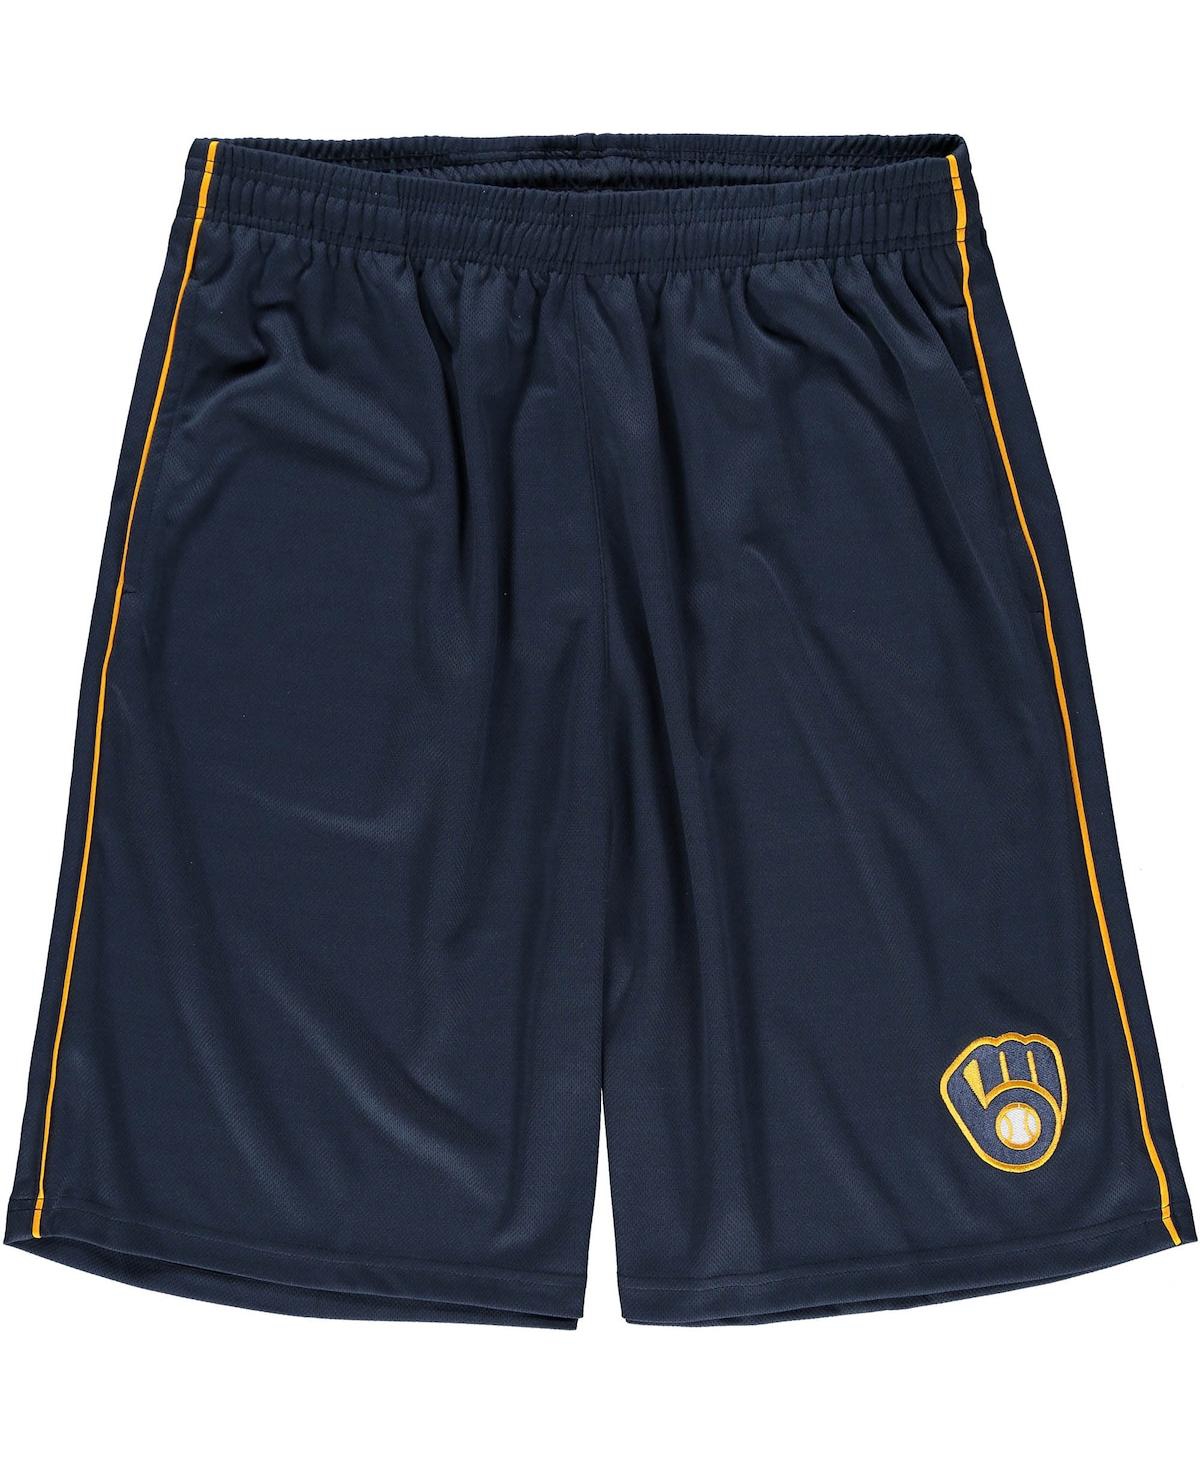 Men's Majestic Navy Milwaukee Brewers Big and Tall Mesh Team Shorts - Navy